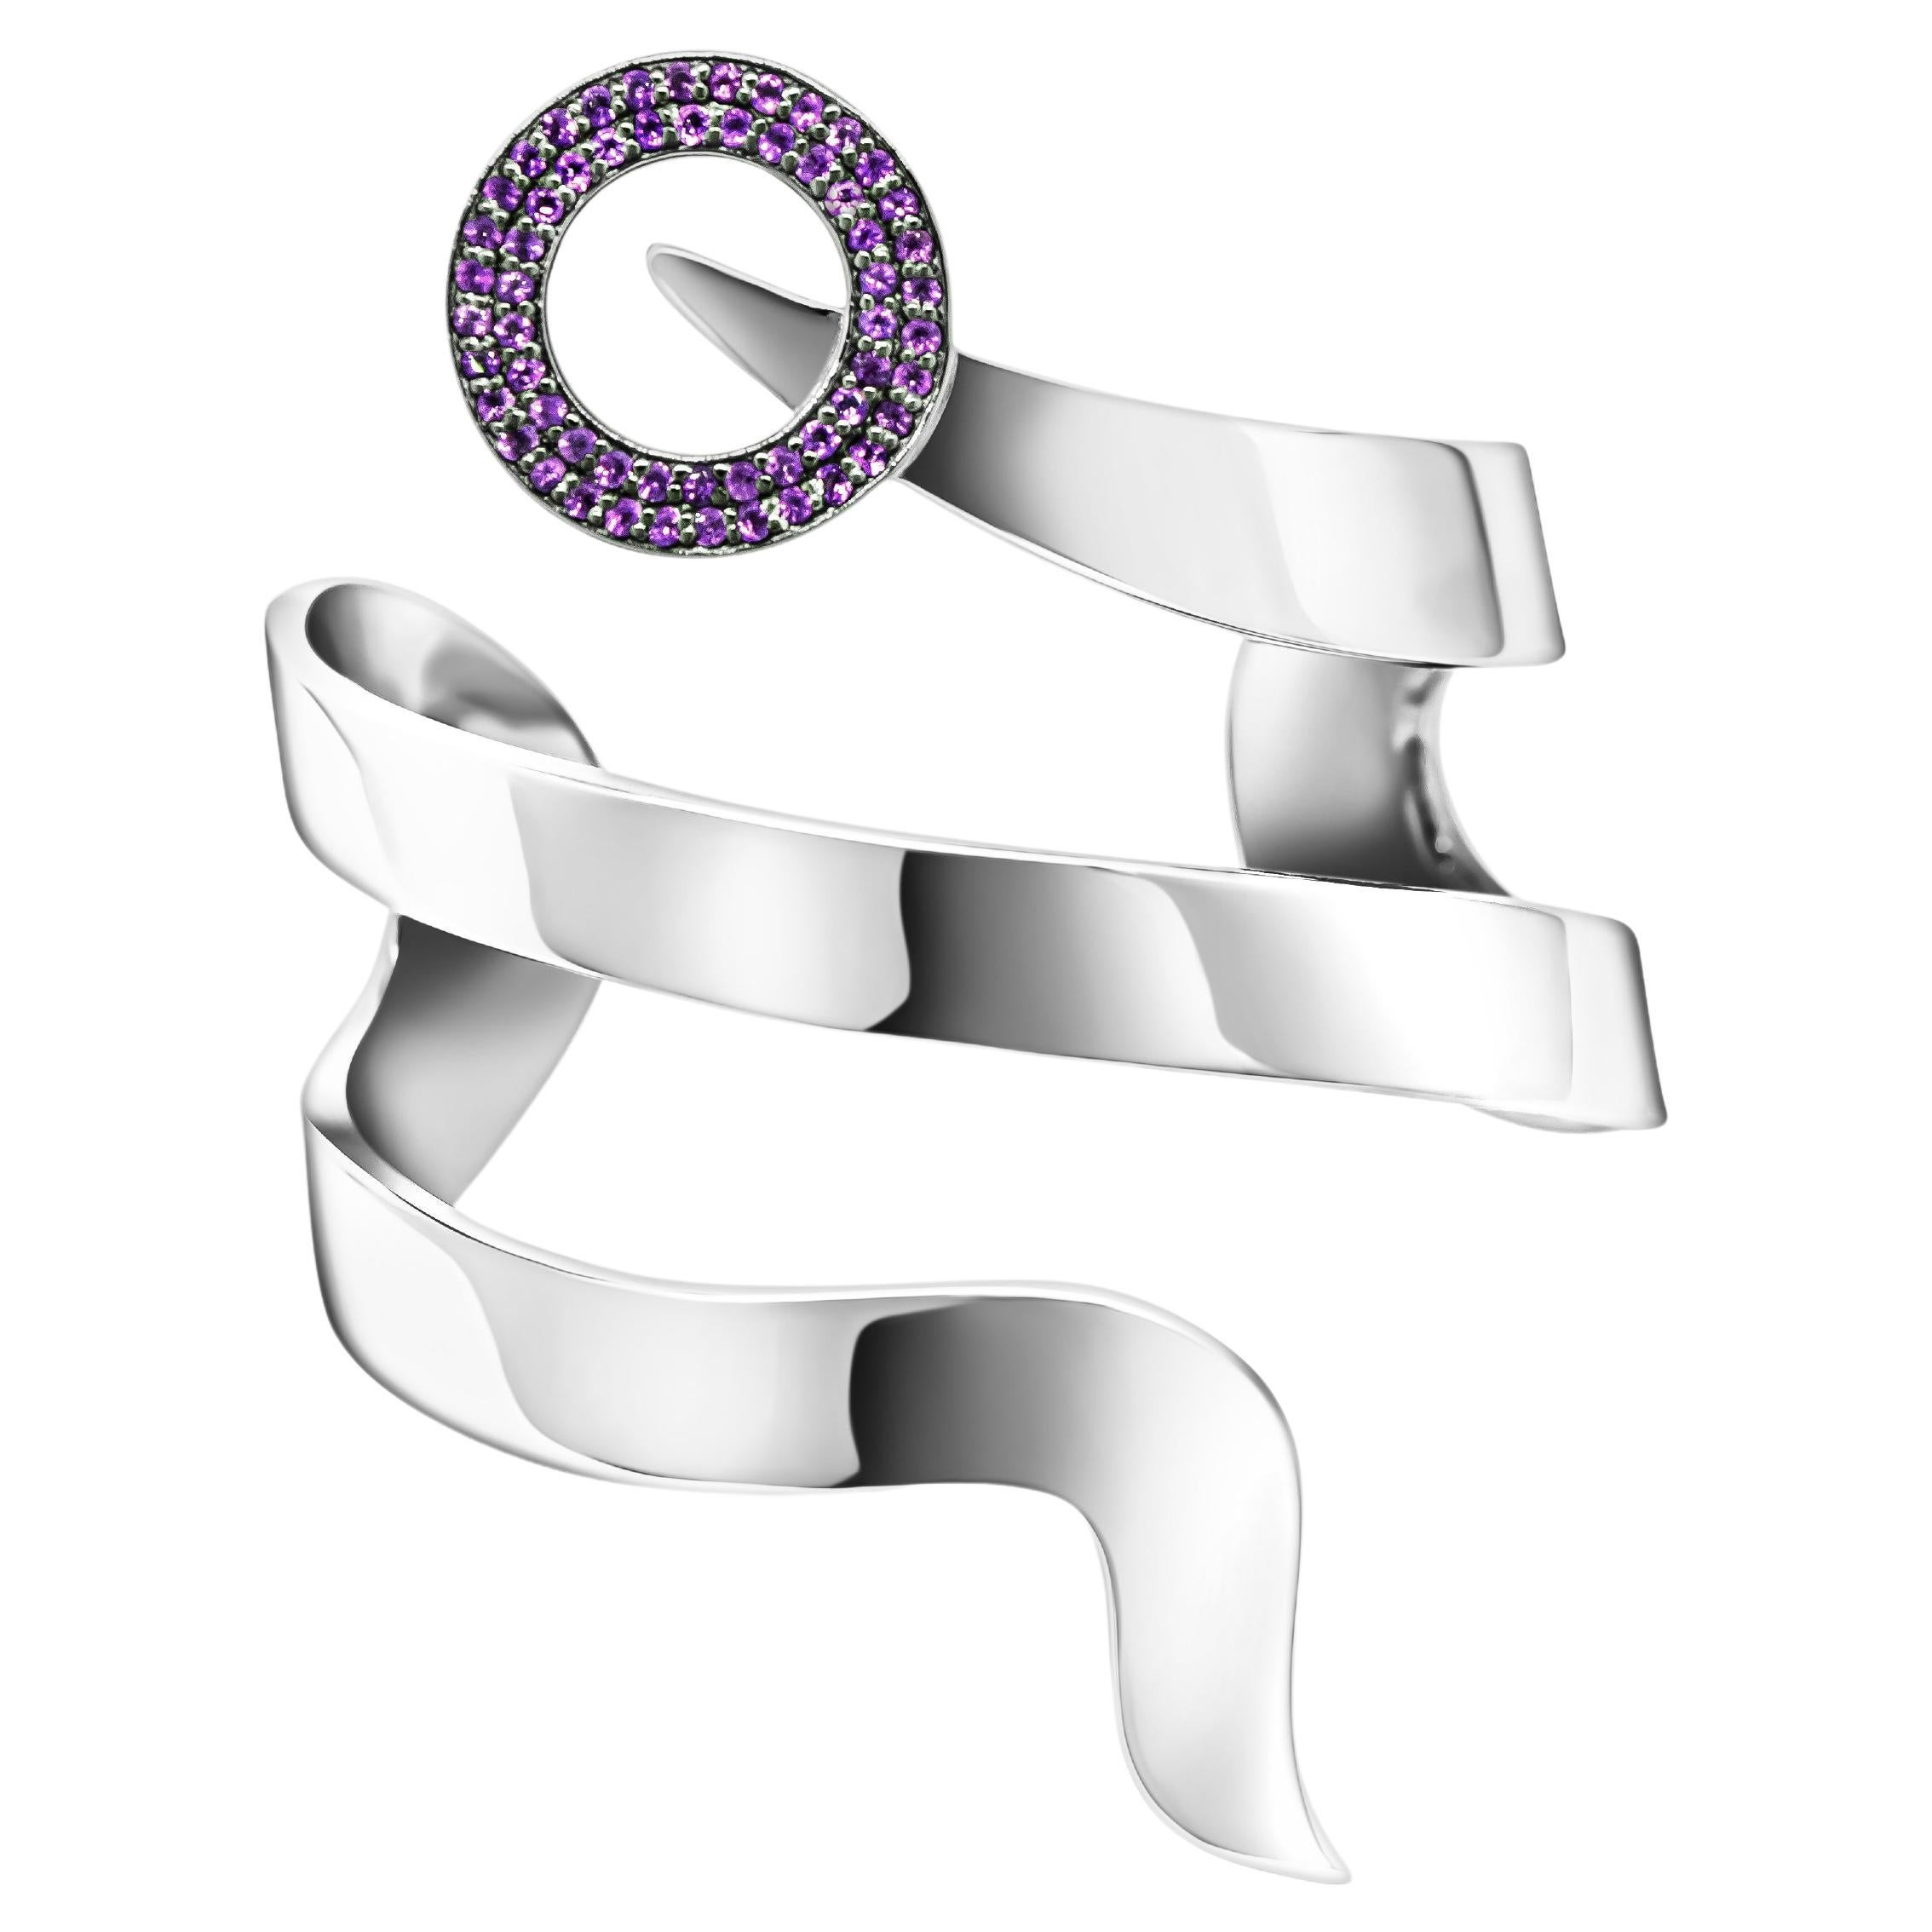  Snake Cuff Bracelet in Sterling Silver with  Amethyst For Sale